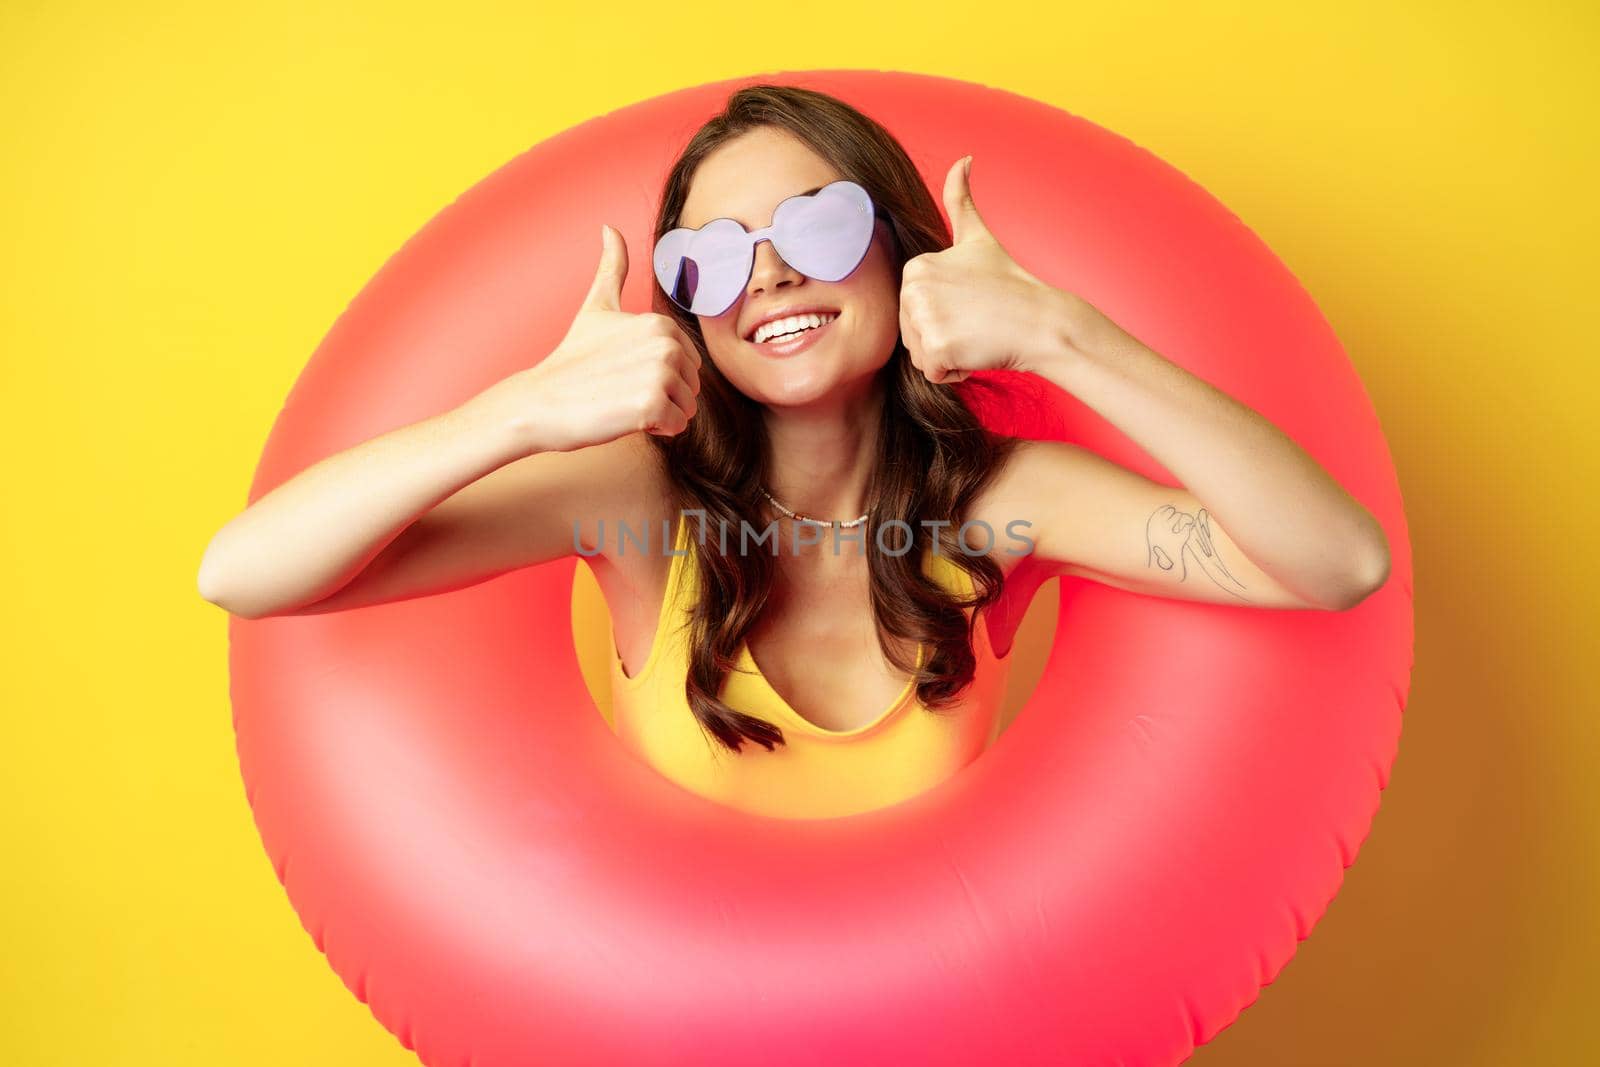 Close up portrait of happy attractive woman in sunglasses, wearing pink swimming ring, smiling and showing thumbs up, standing over yellow background.